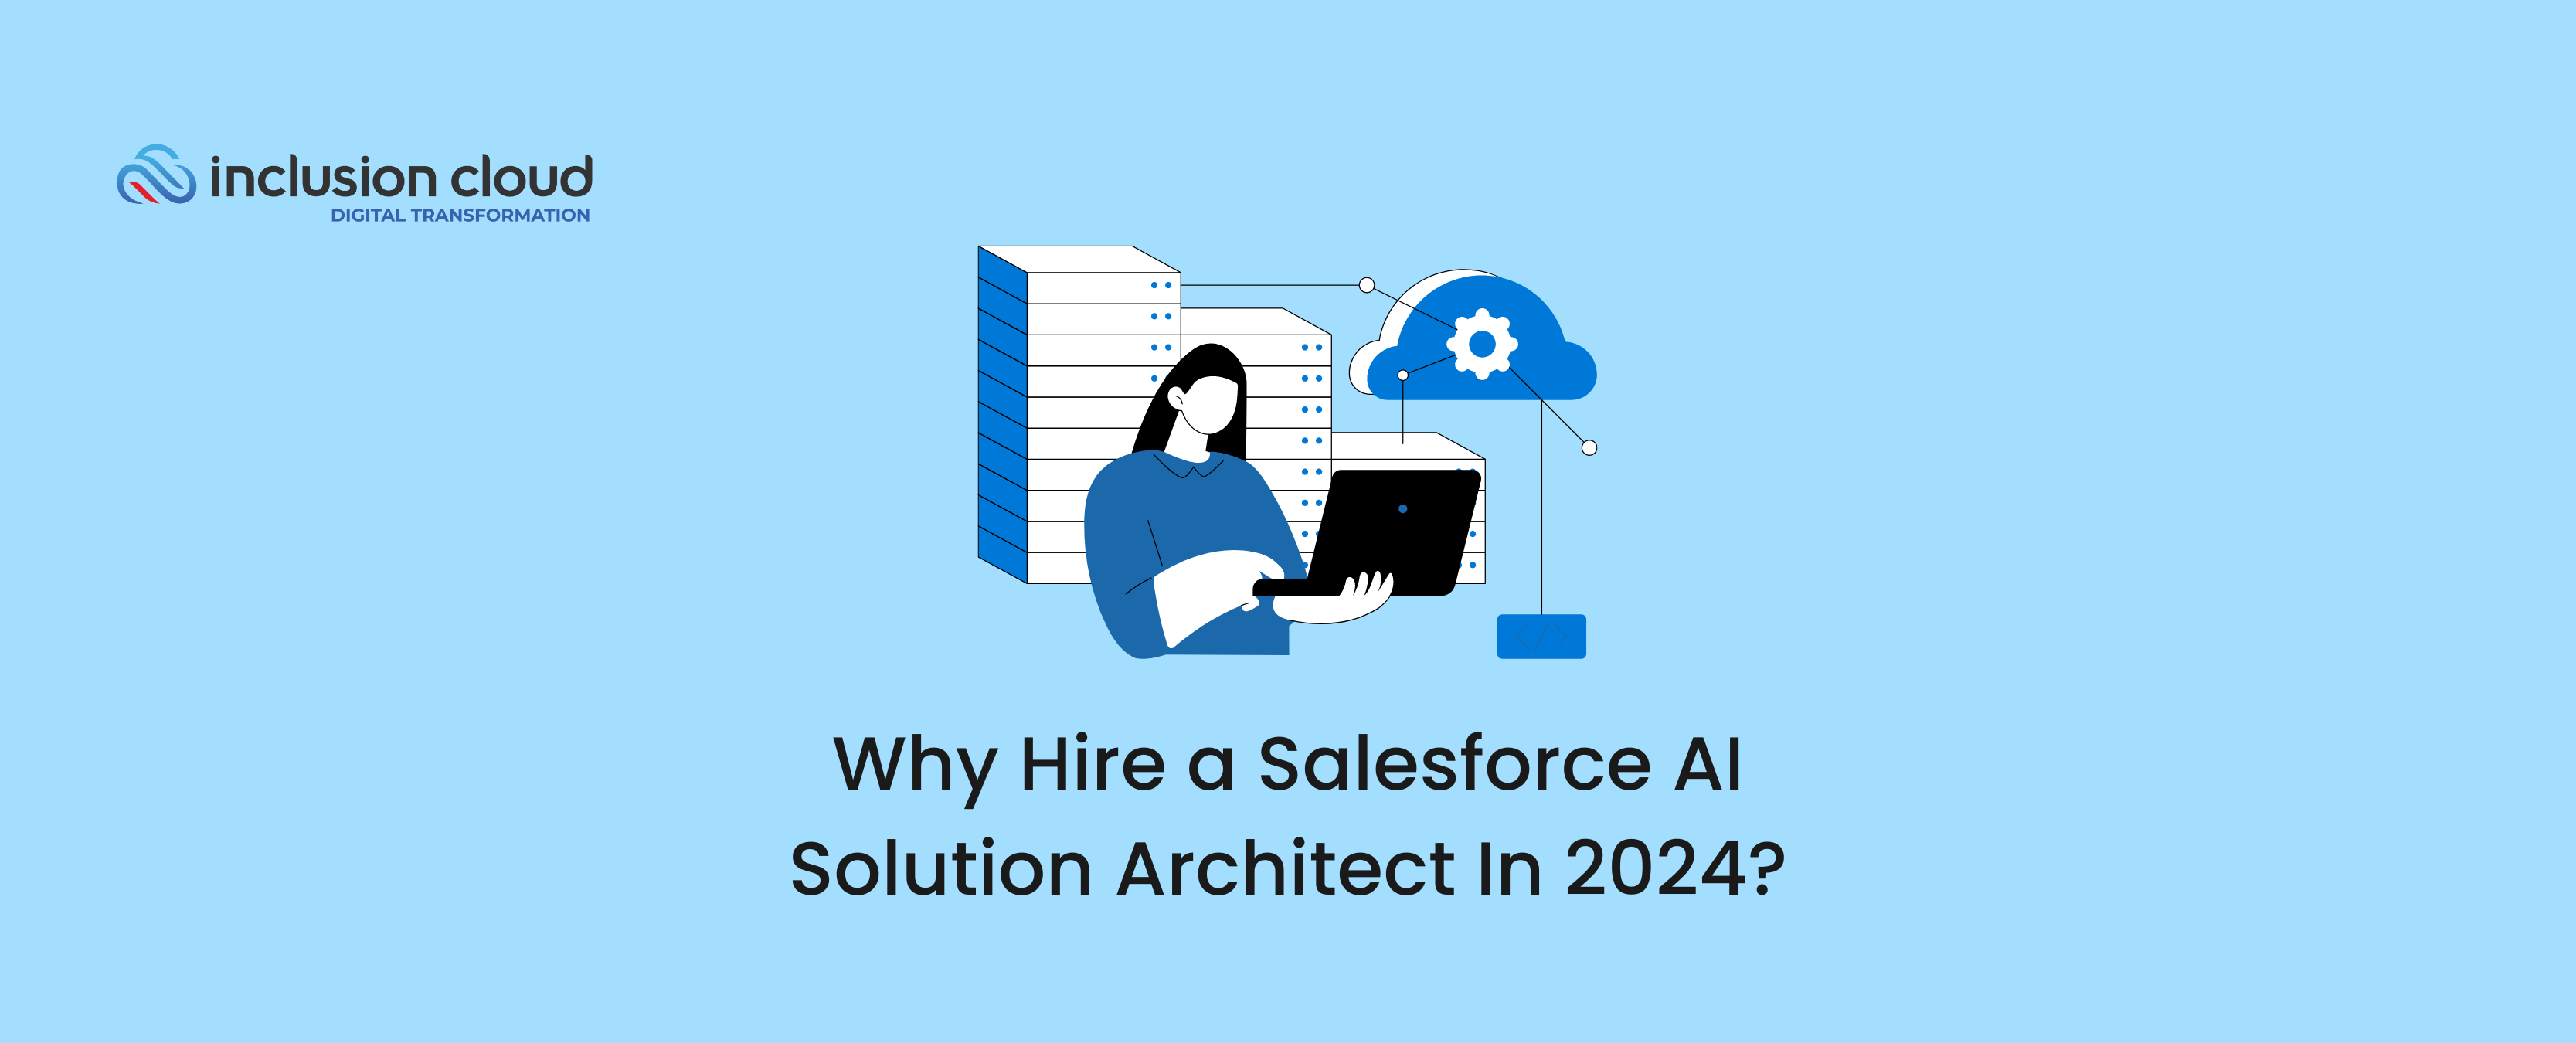 Why Hire a Salesforce AI Solution Architect In 2024